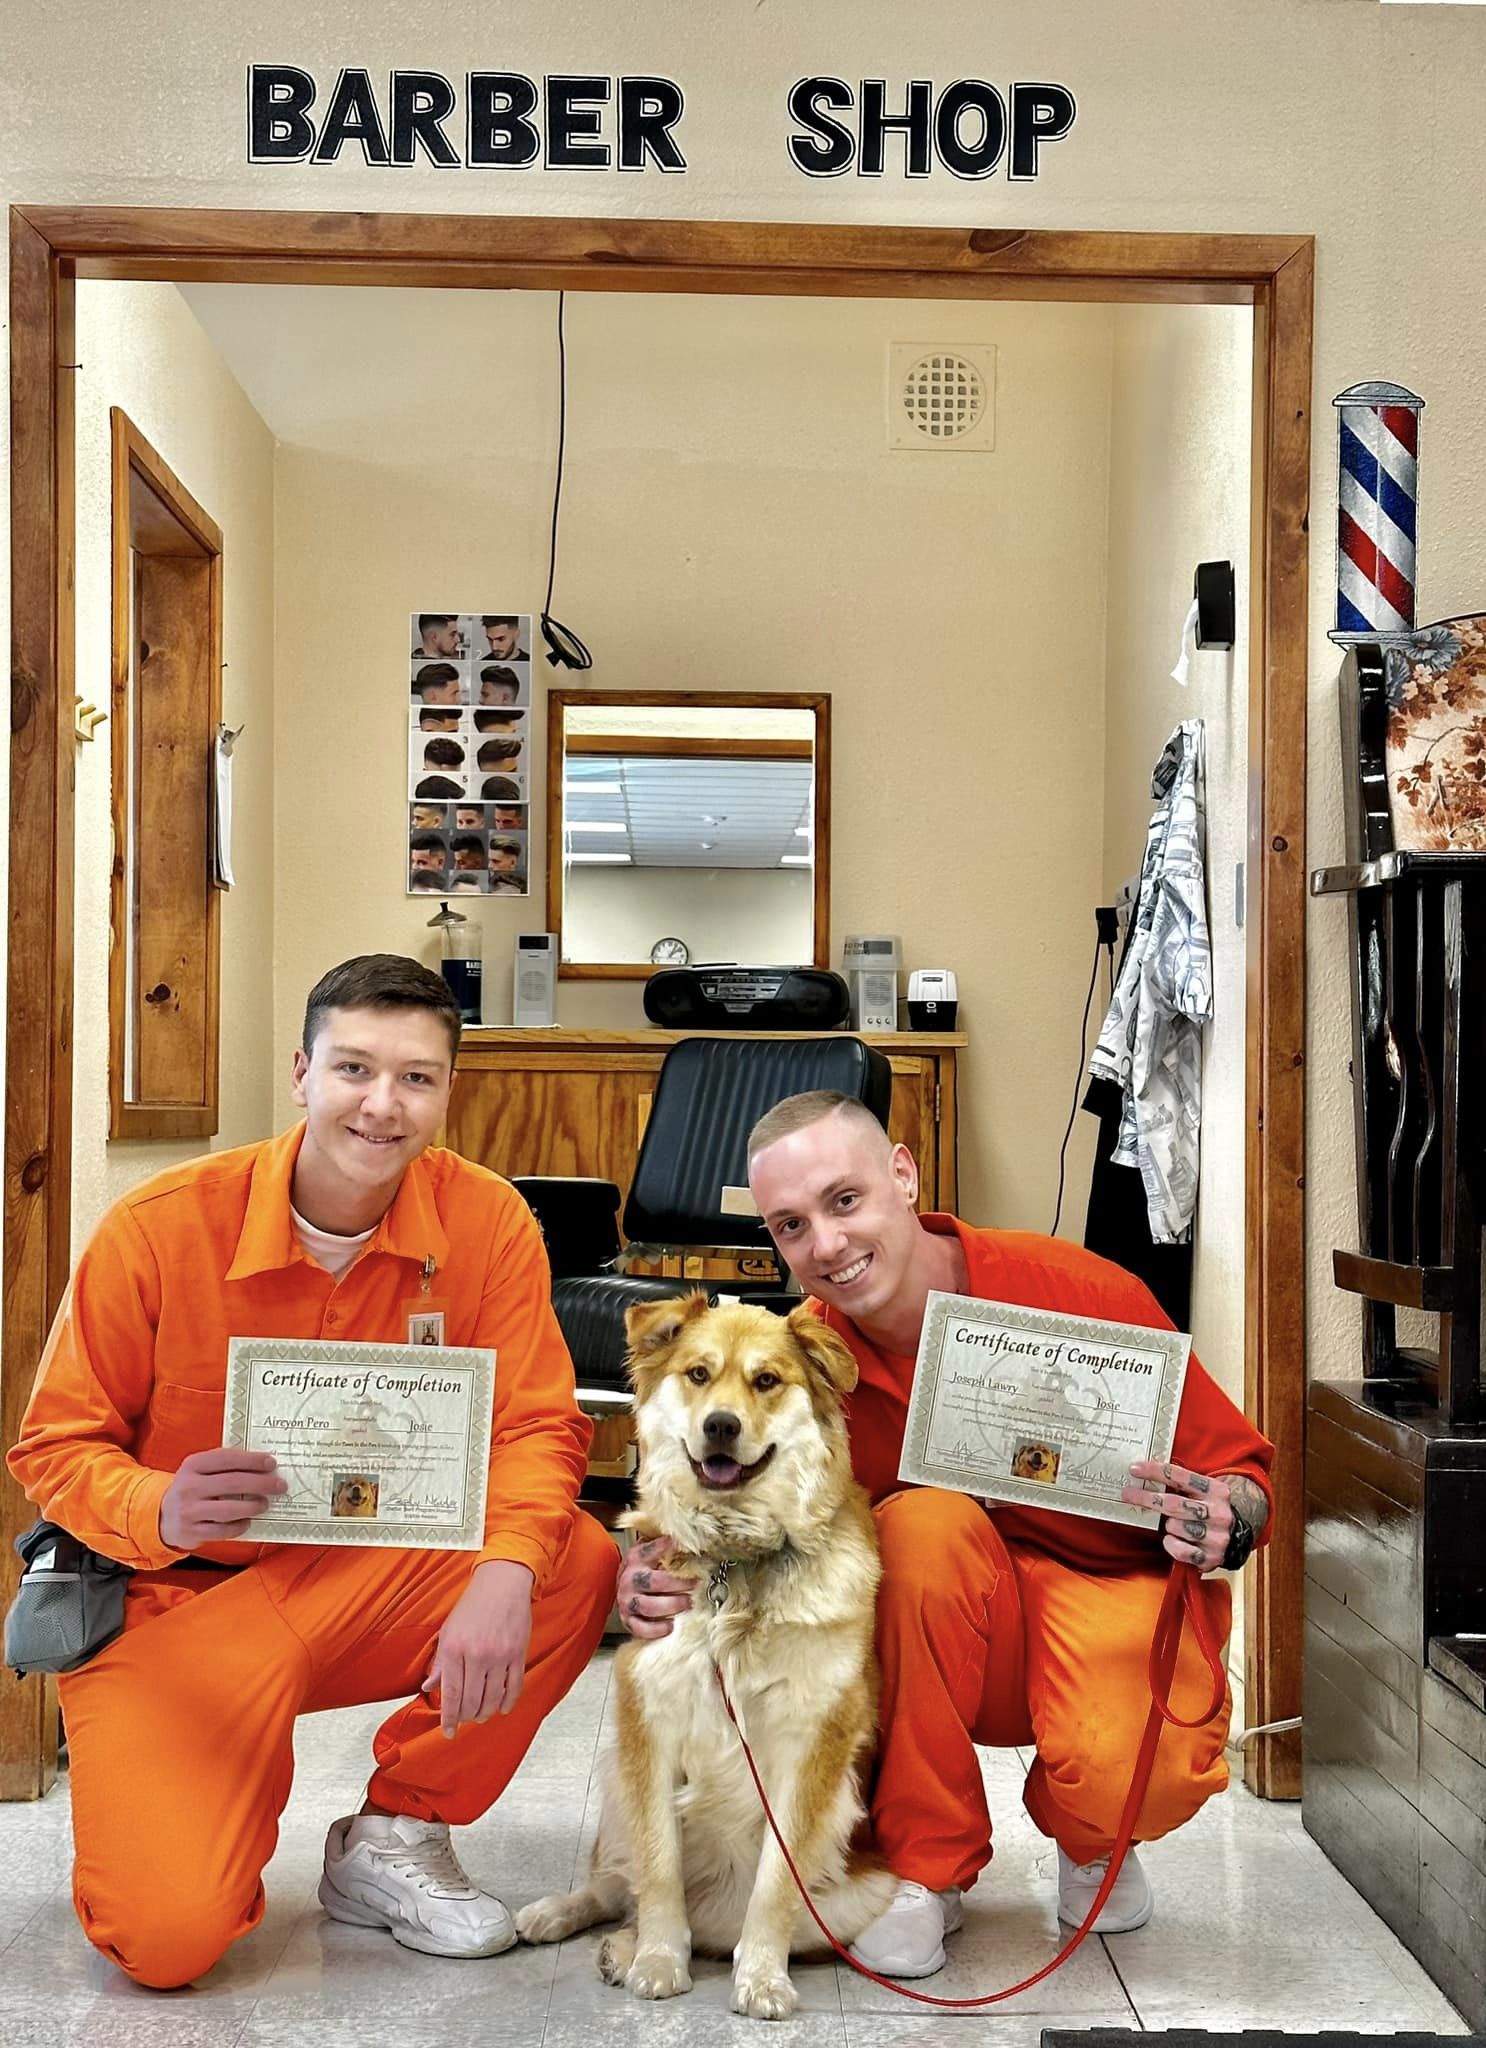 Inmates holding their certificates and petting a dog